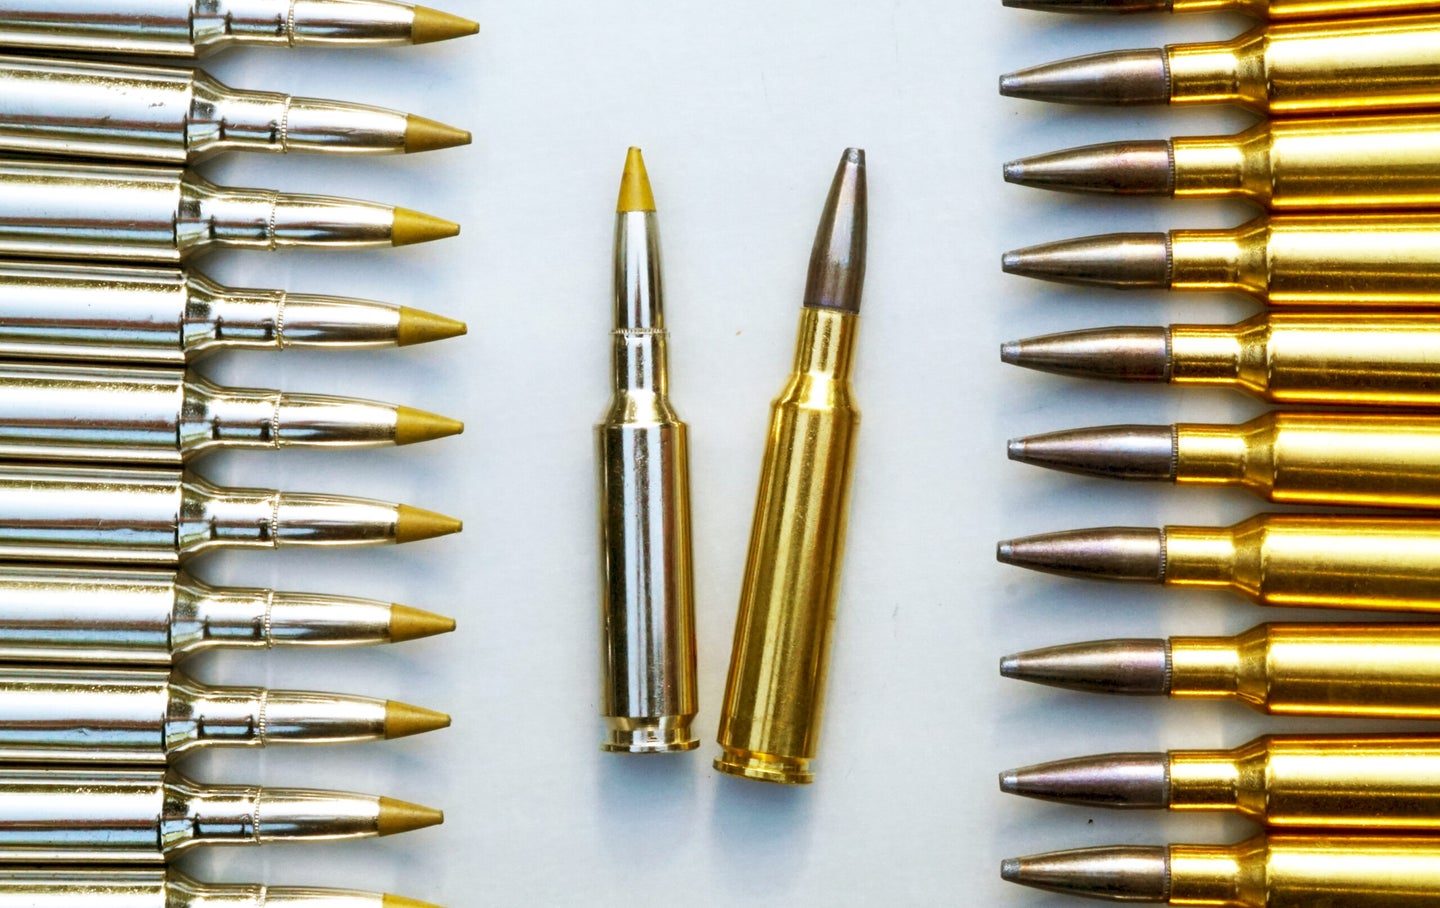 A 6.5 Creedmoor and a 6.5X55 Swedish side by side.